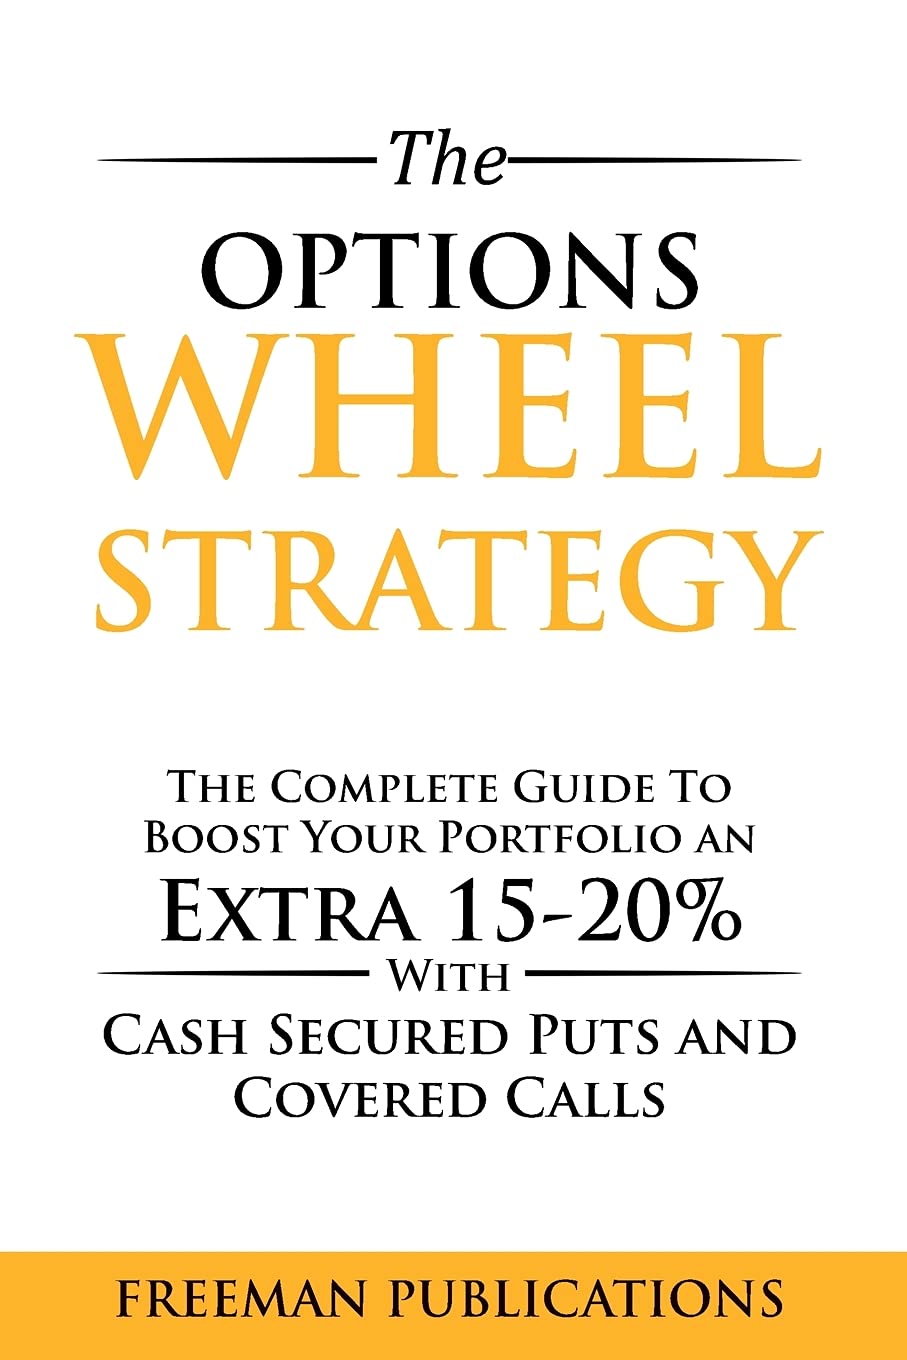 THE OPTIONS WHEEL STRATEGY